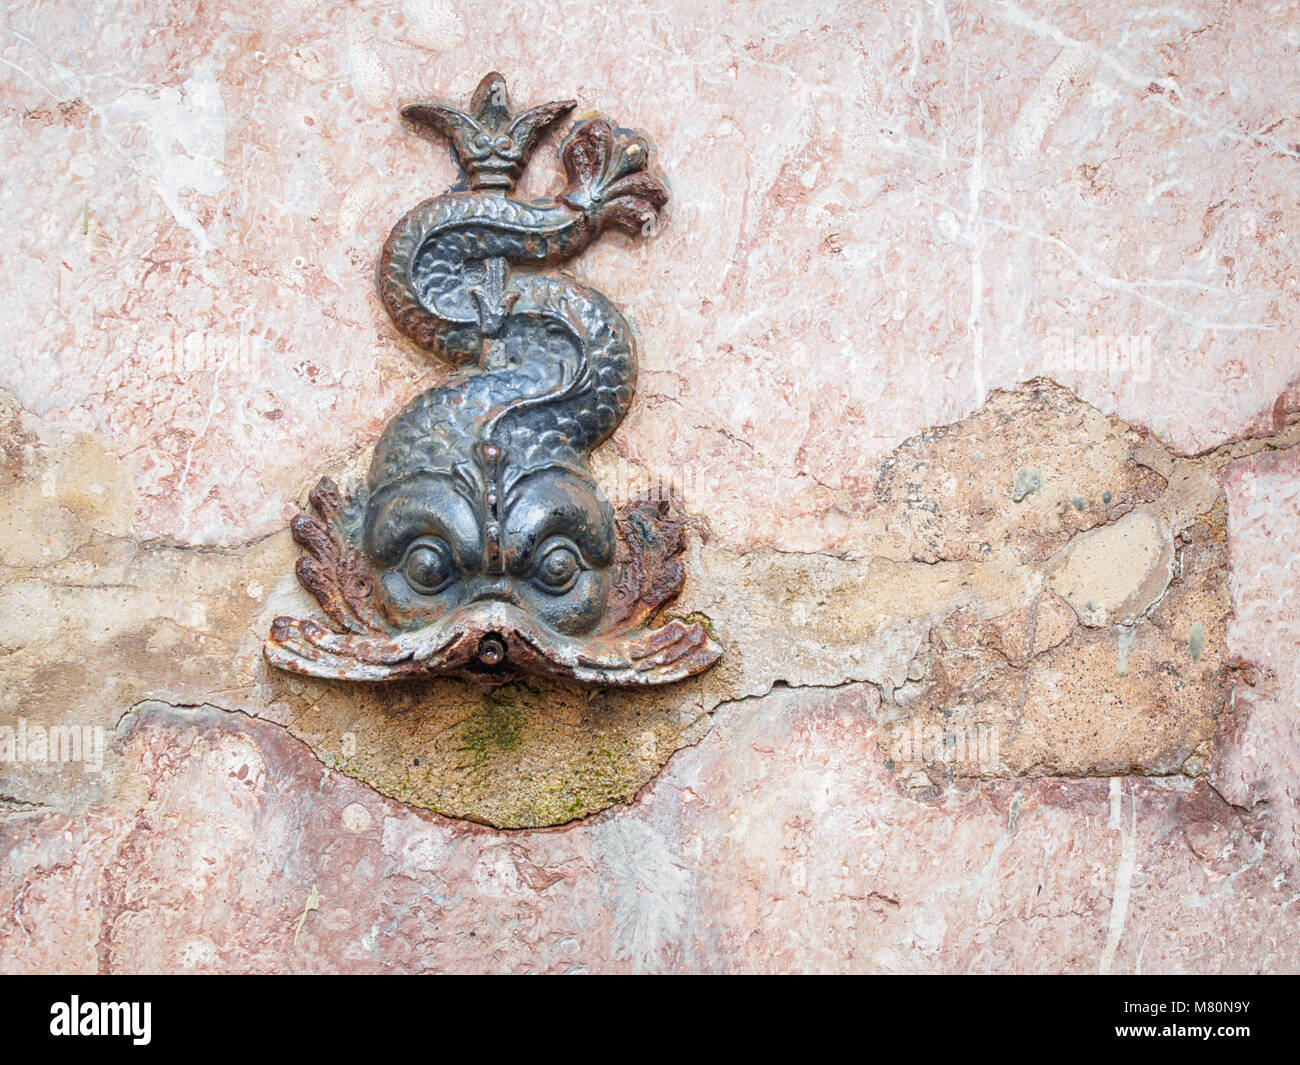 Metallic antique fish fontain sculpture on the wall Stock Photo